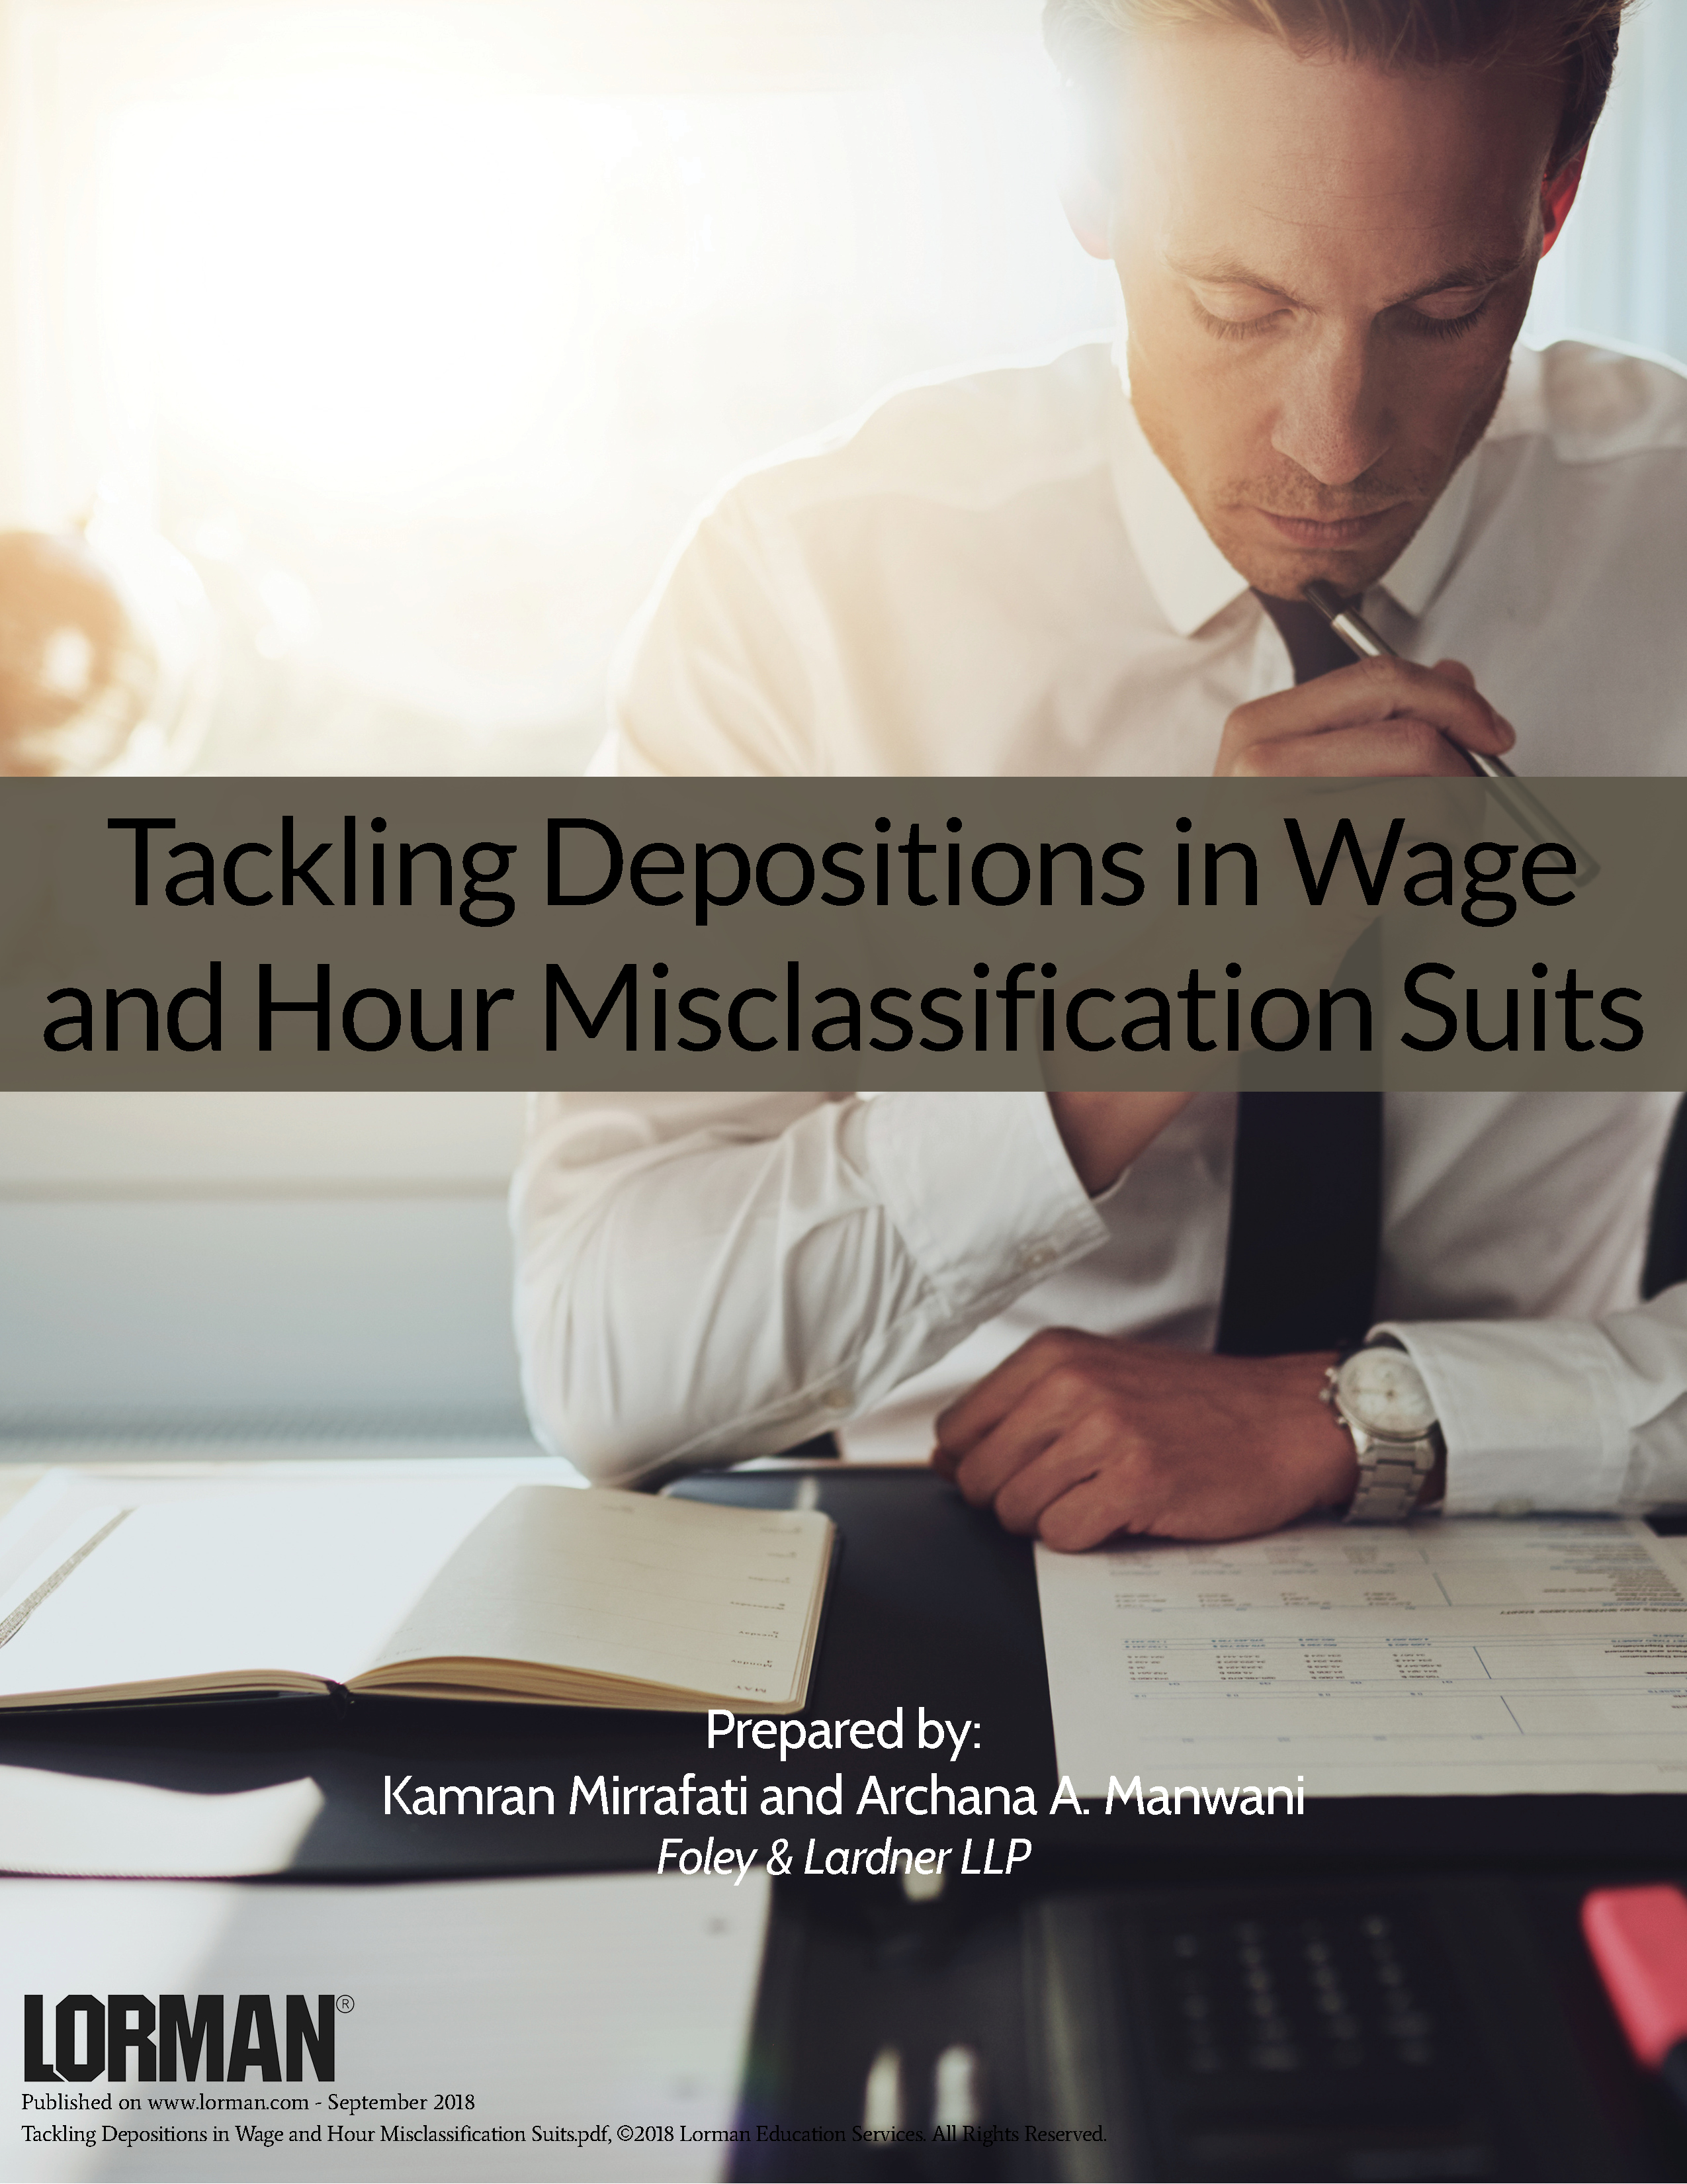 Tackling Depositions in Wage and Hour Misclassification Suits